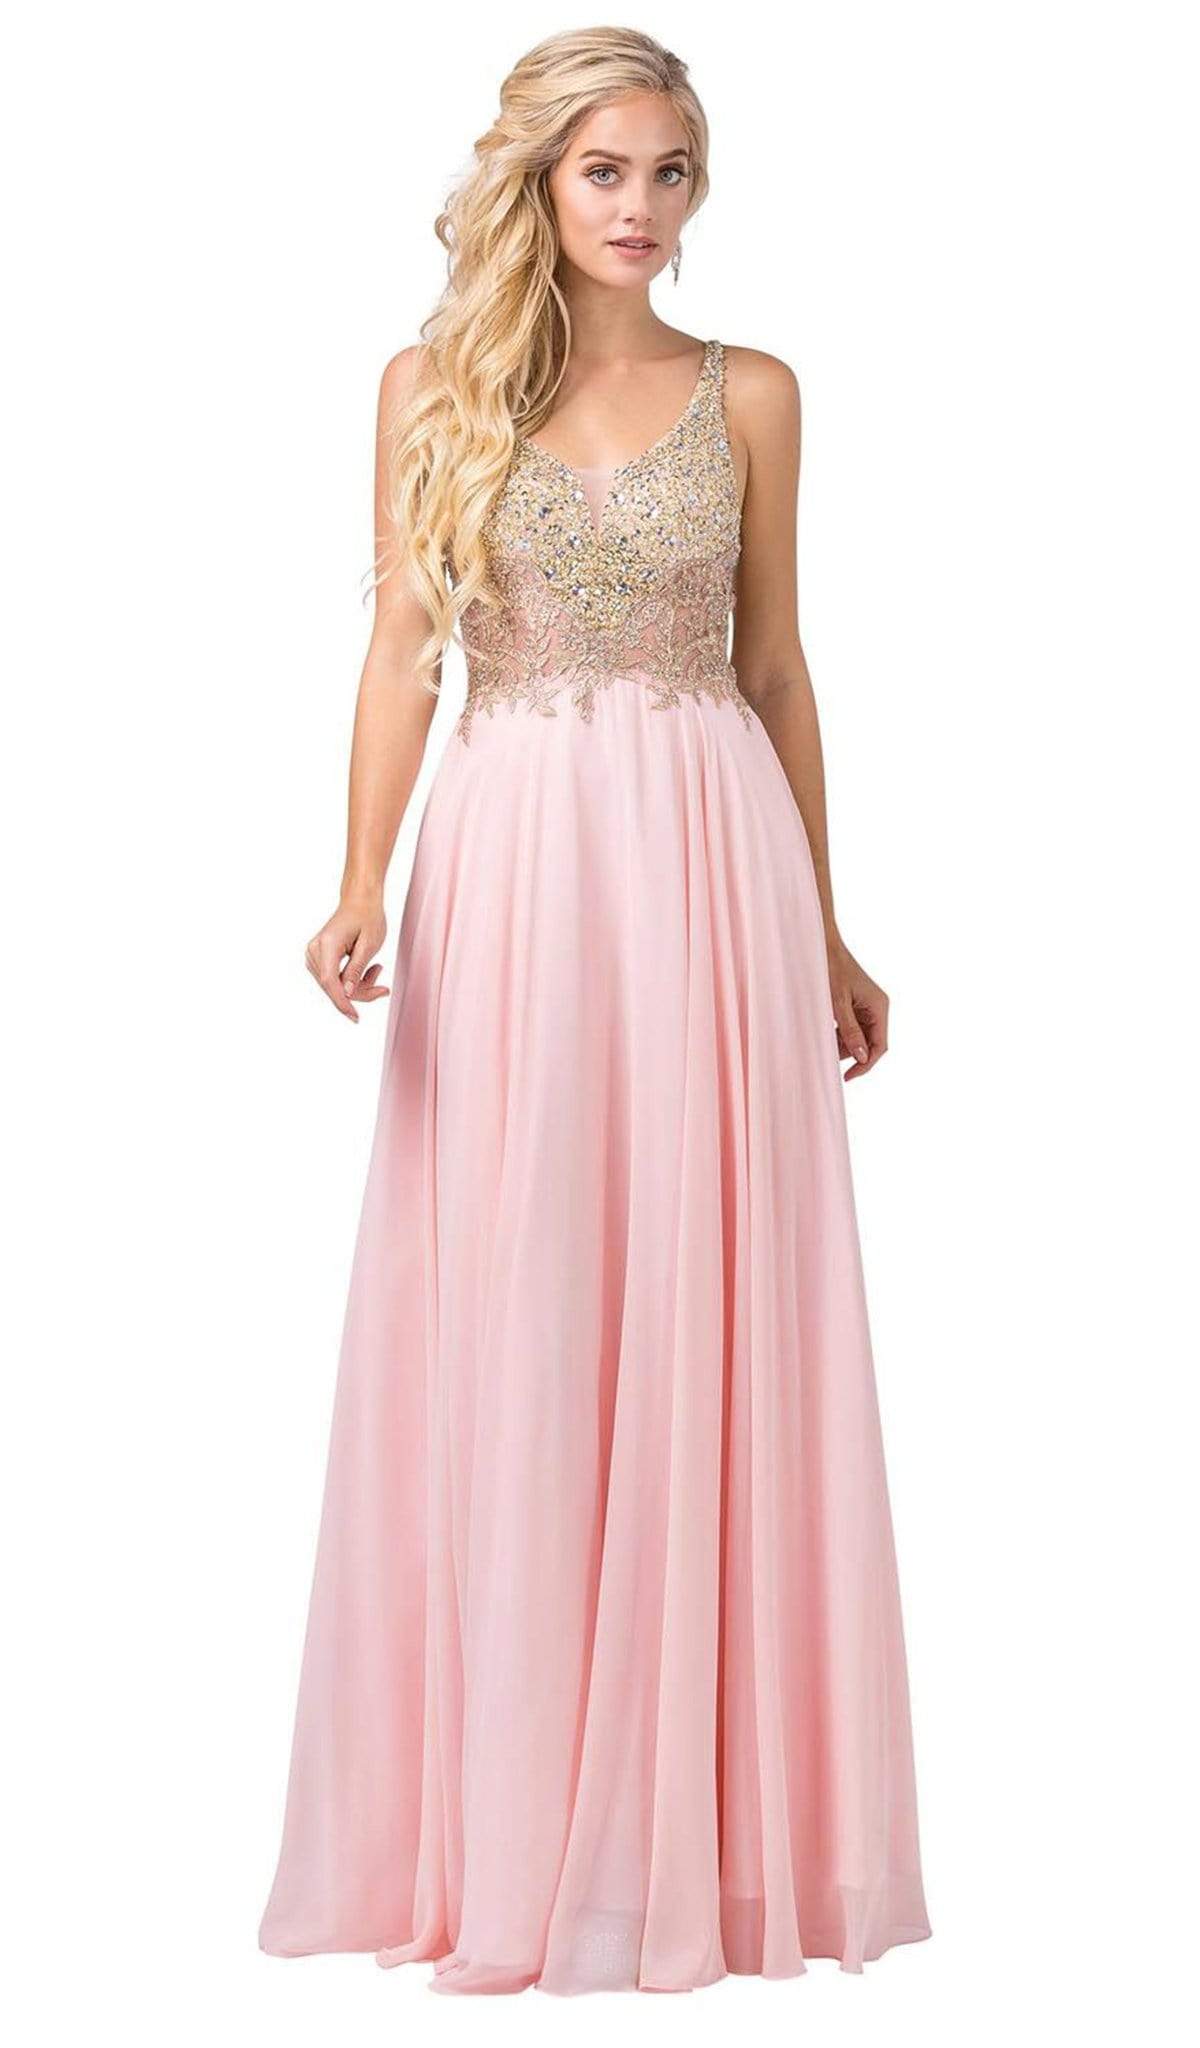 Image of Dancing Queen - 2494 Jewel Encrusted Bodice A-Line Chiffon Gown